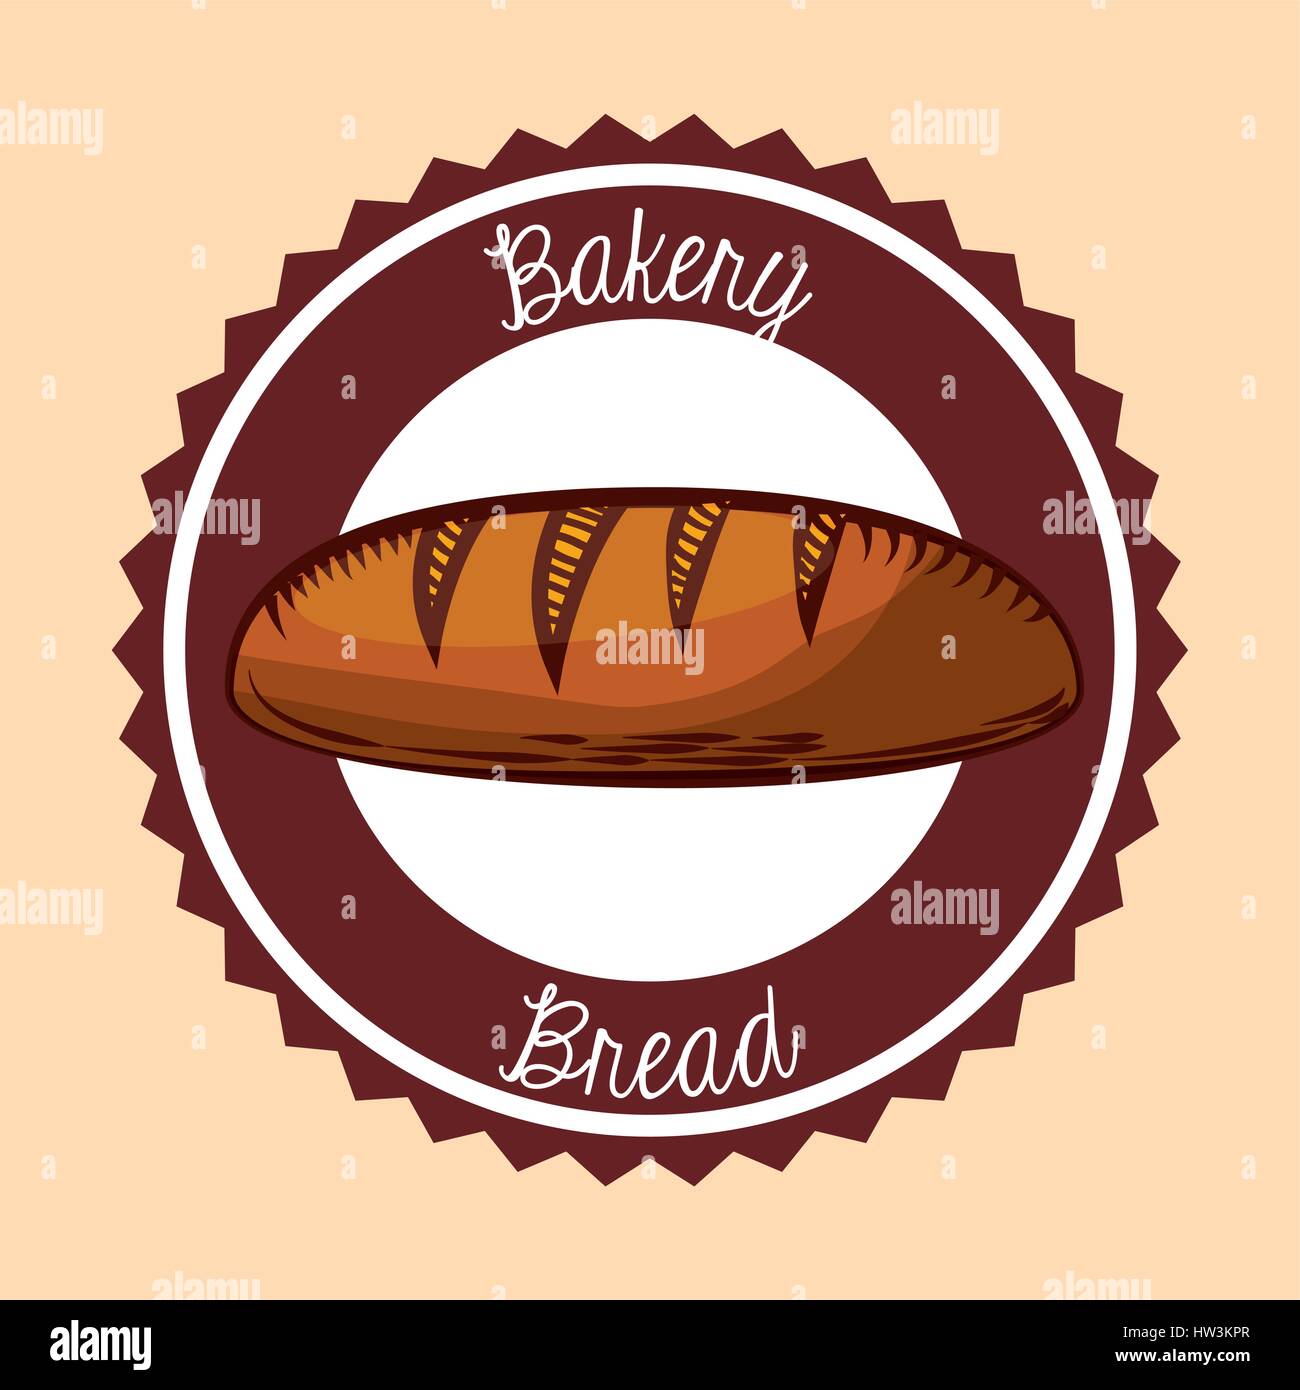 Bakery Products Design Stock Vector Art Illustration Vector